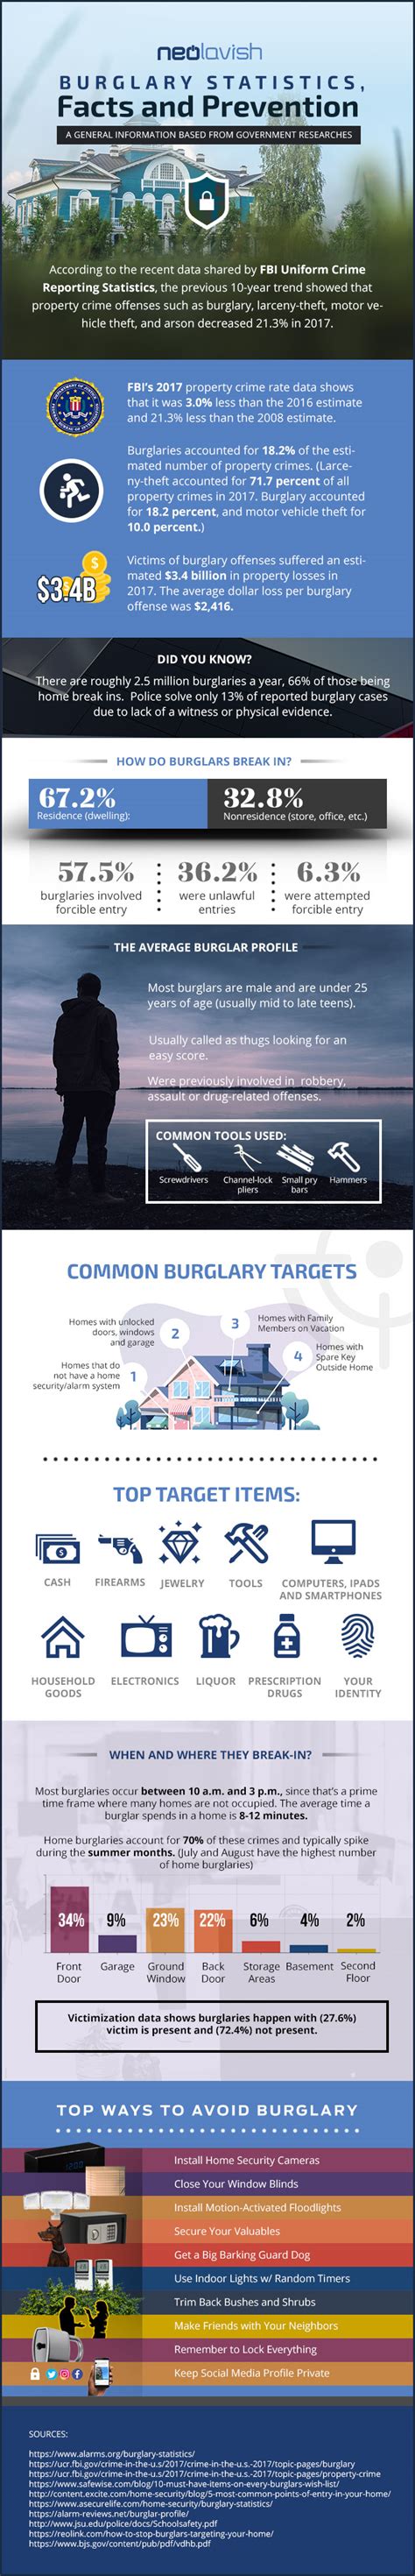 Burglary Statistics Facts And Prevention Infographic